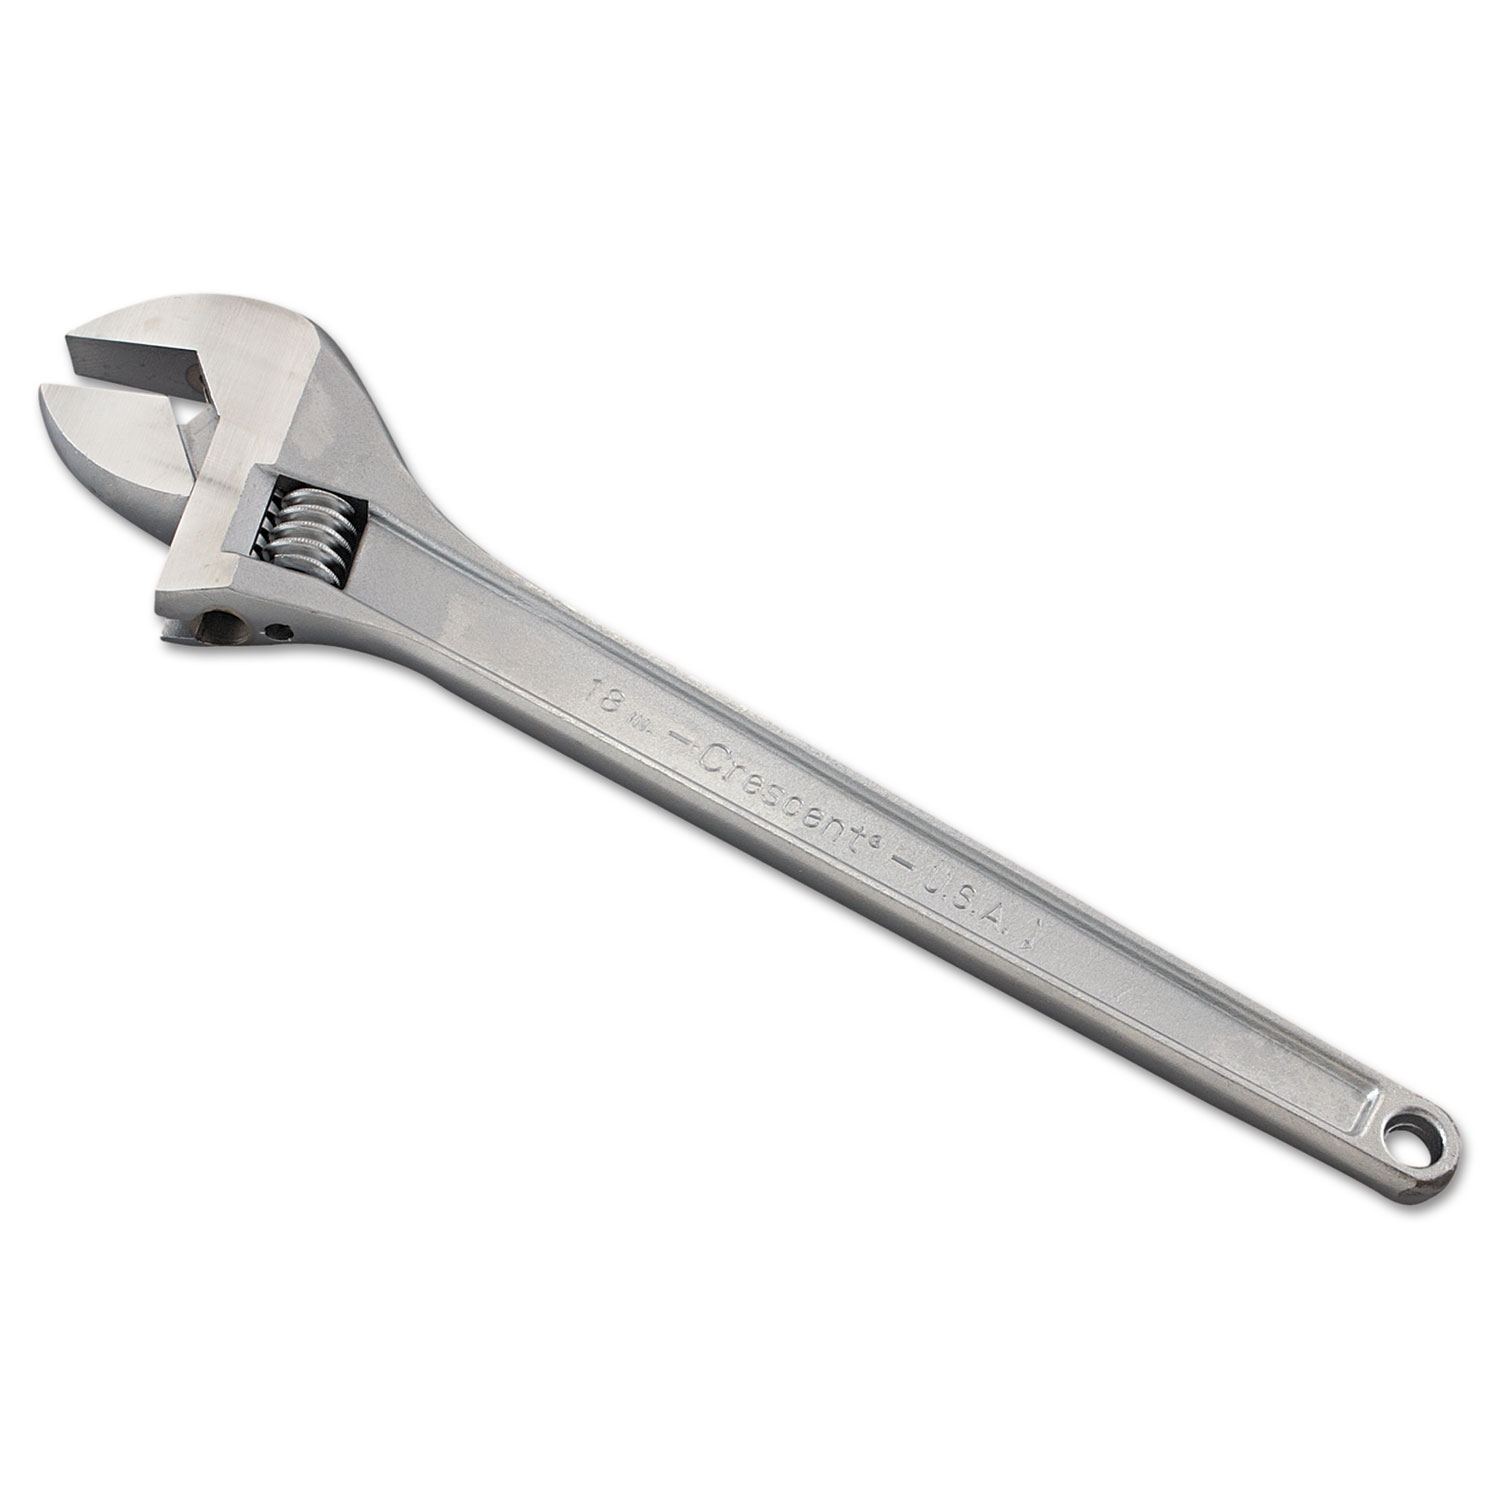 Crescent Adjustable Wrench, 18 Long, 2 1/16 Opening, Chrome